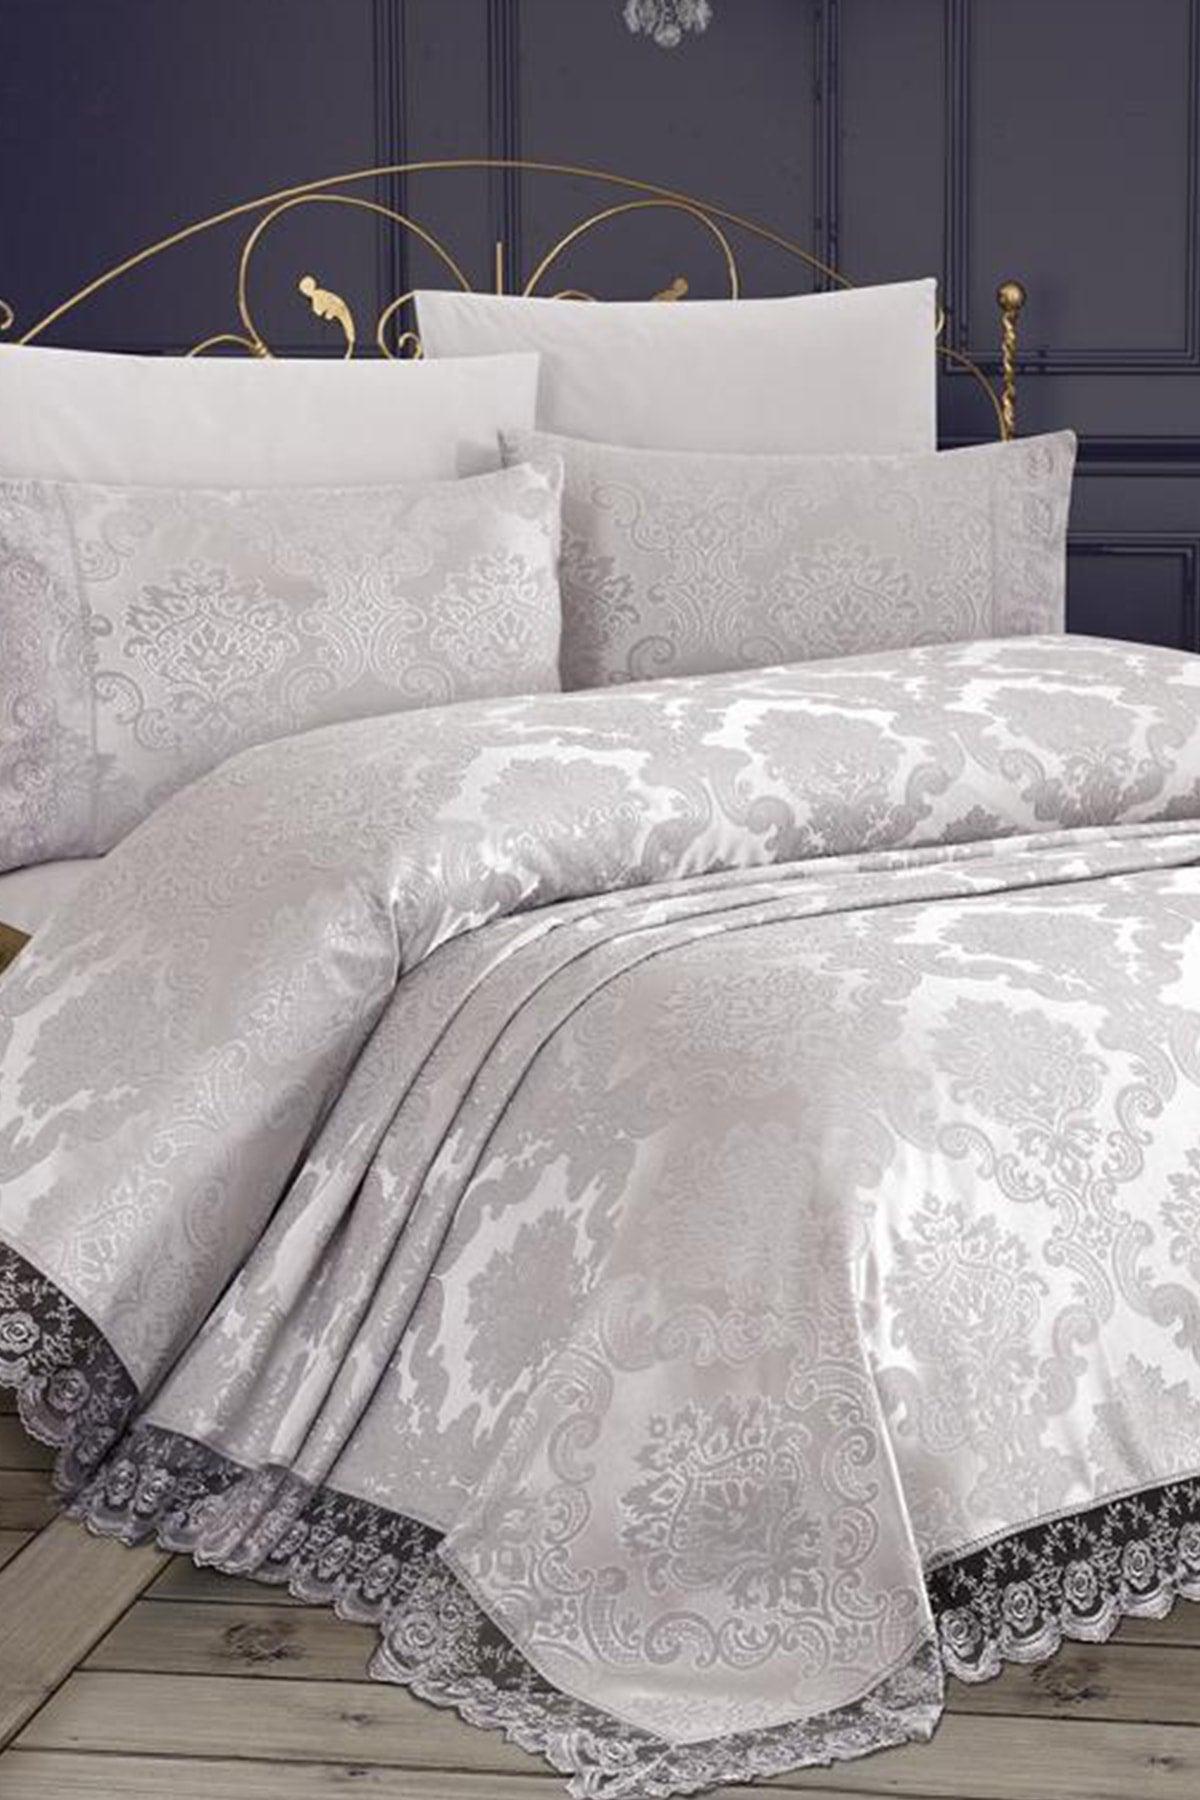 French Lace Kure 3 Piece Bedspread Gray - Swordslife